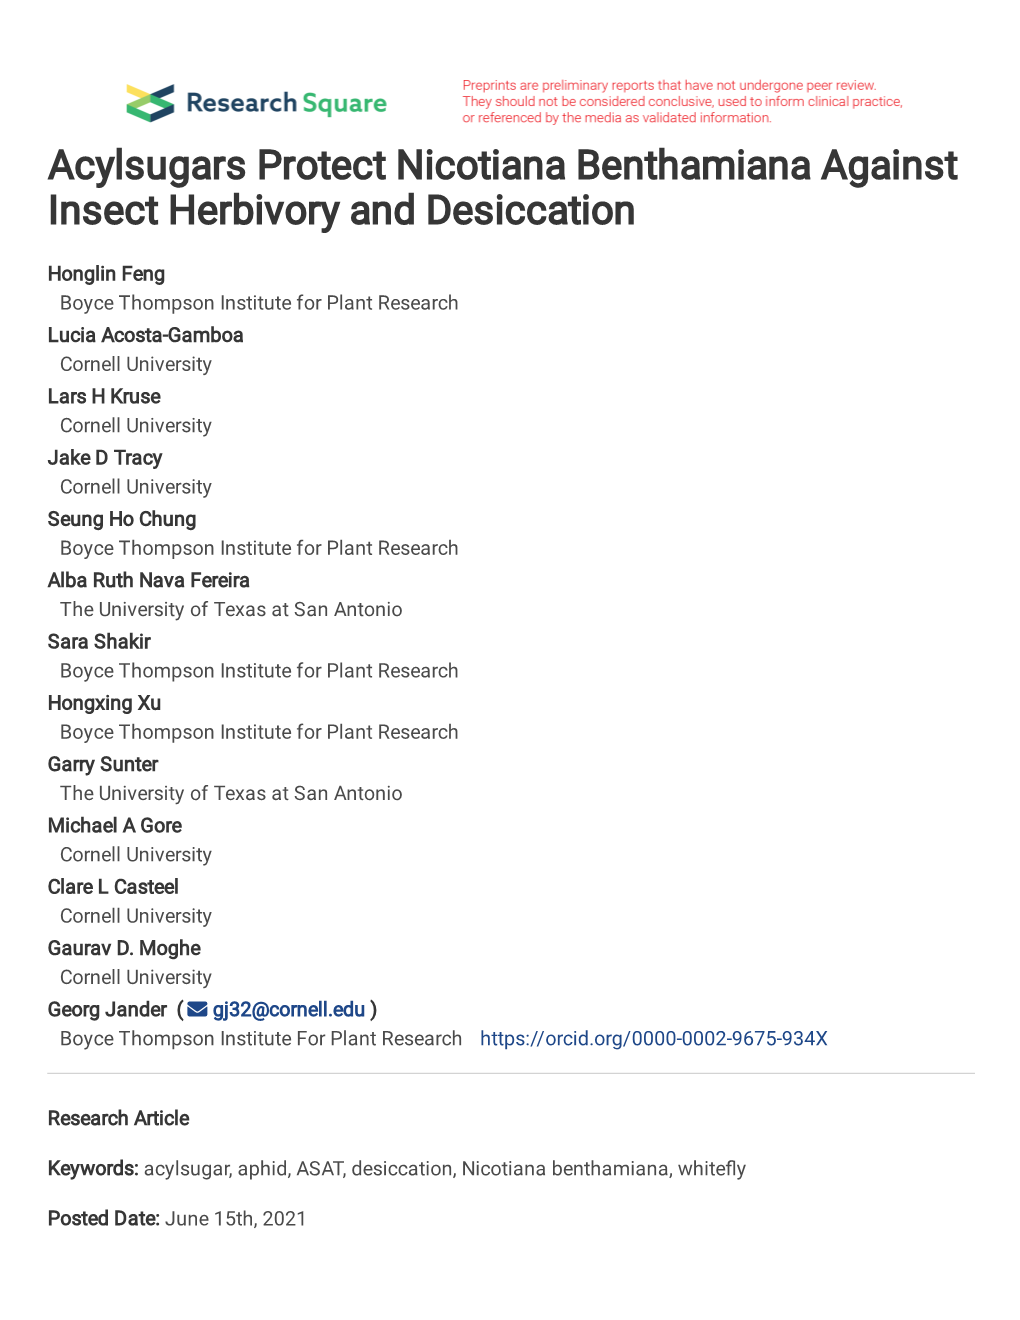 Acylsugars Protect Nicotiana Benthamiana Against Insect Herbivory and Desiccation